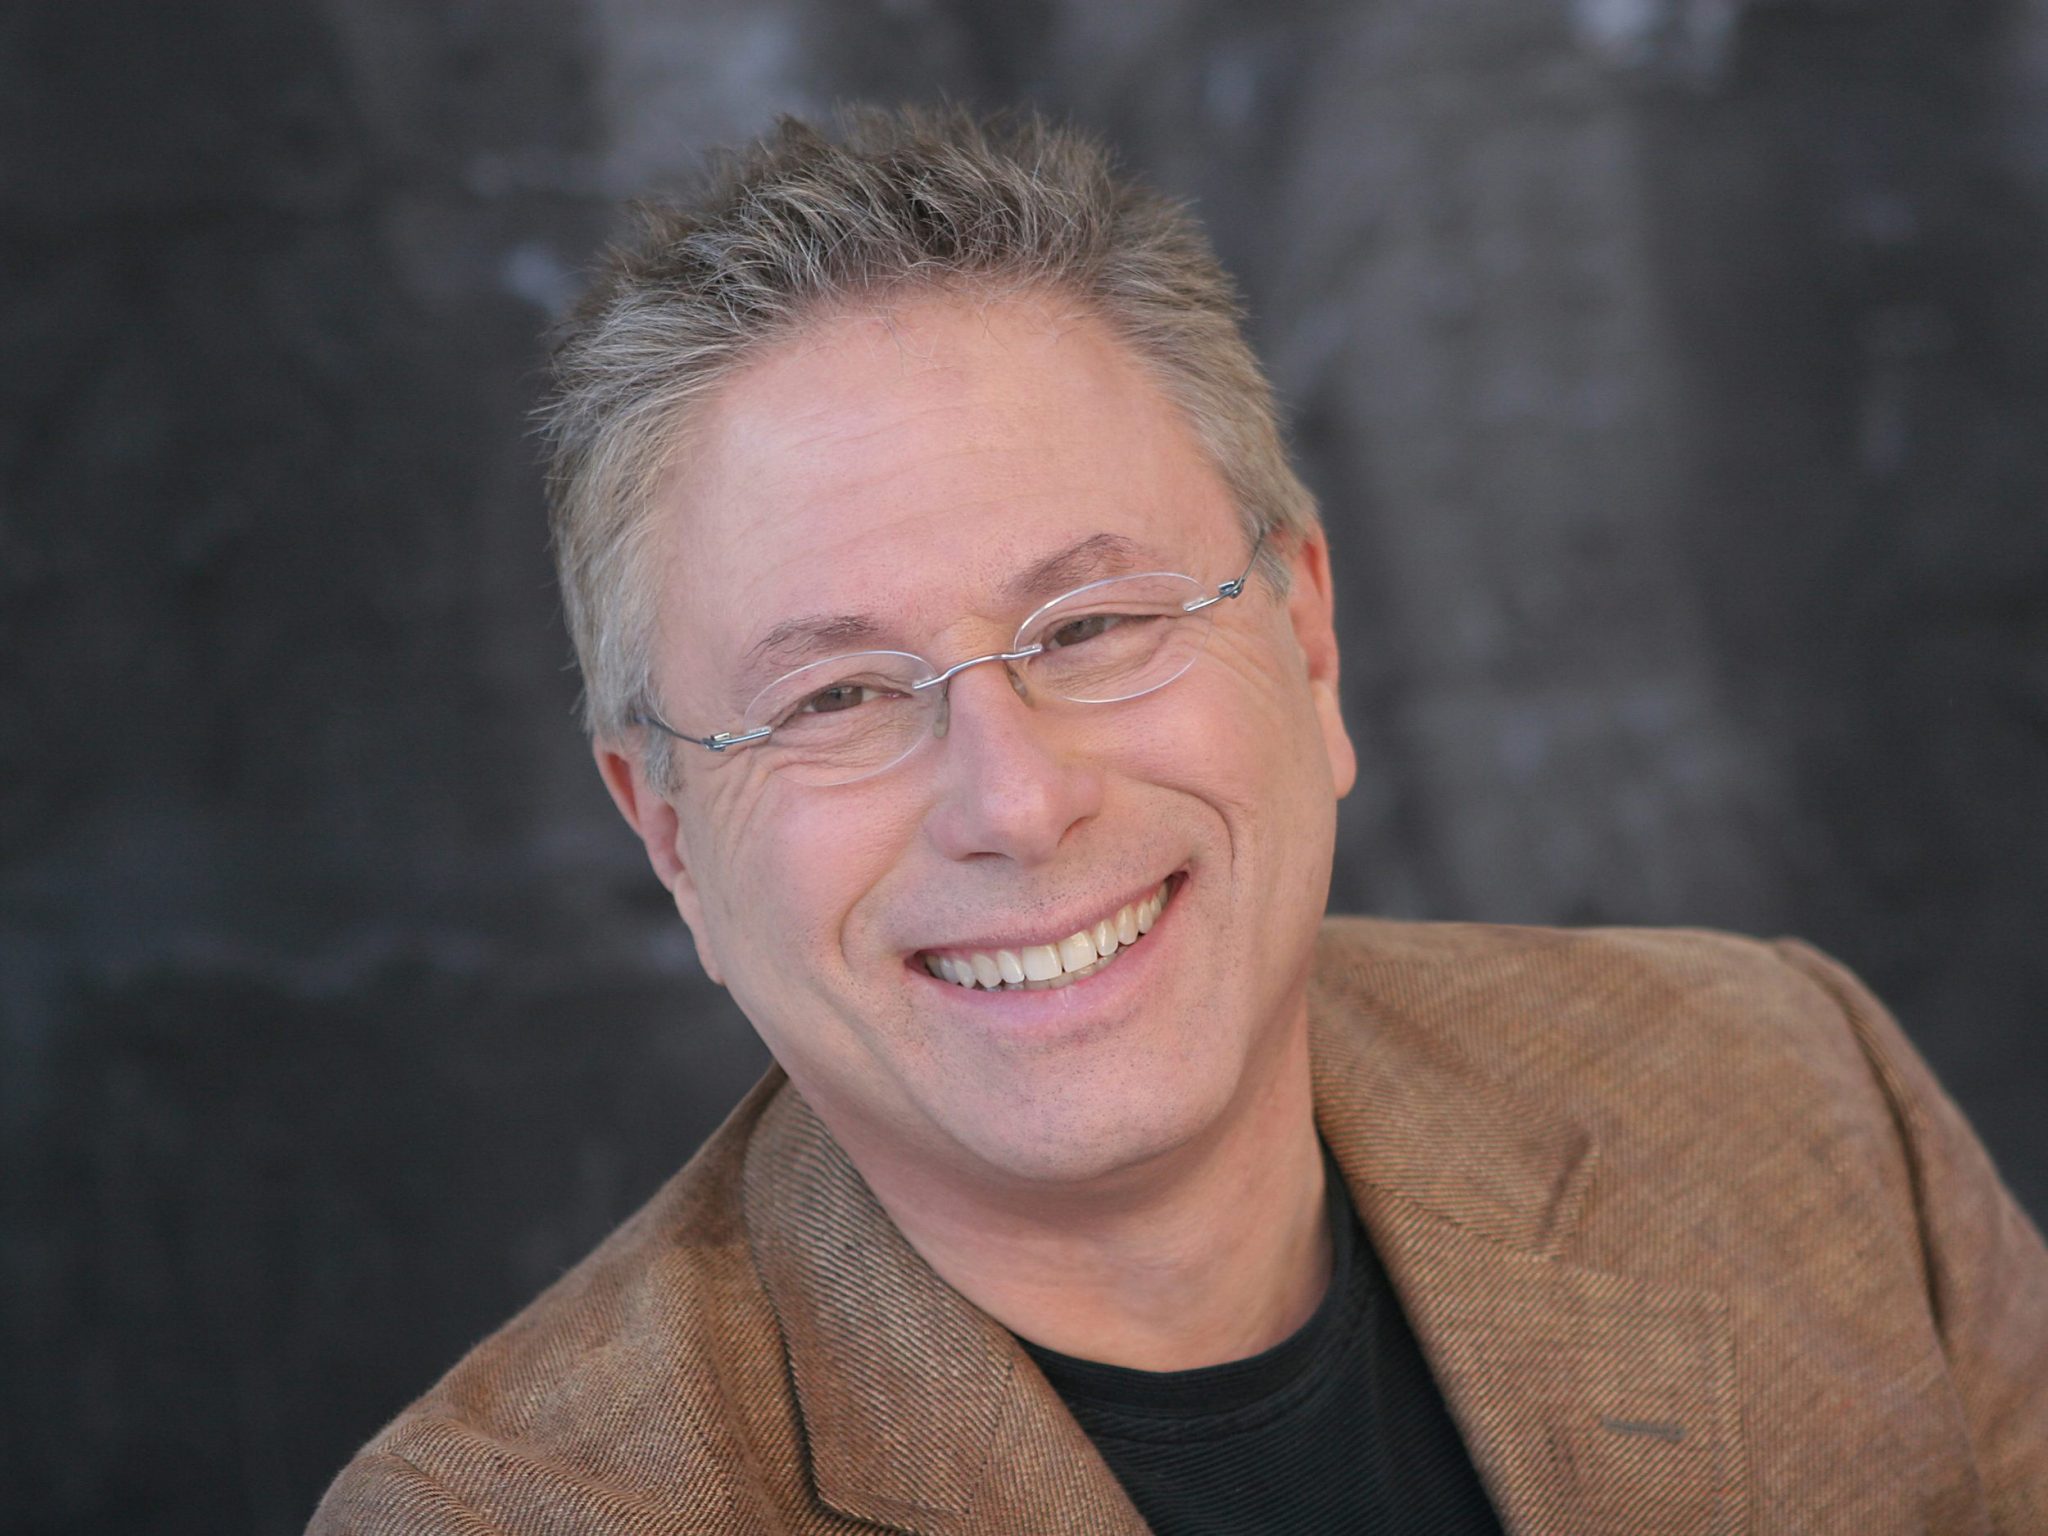 A Whole New World of Alan Menken – Disney Legend Alan Menken’s New One-Man Show to be Presented at D23 Expo